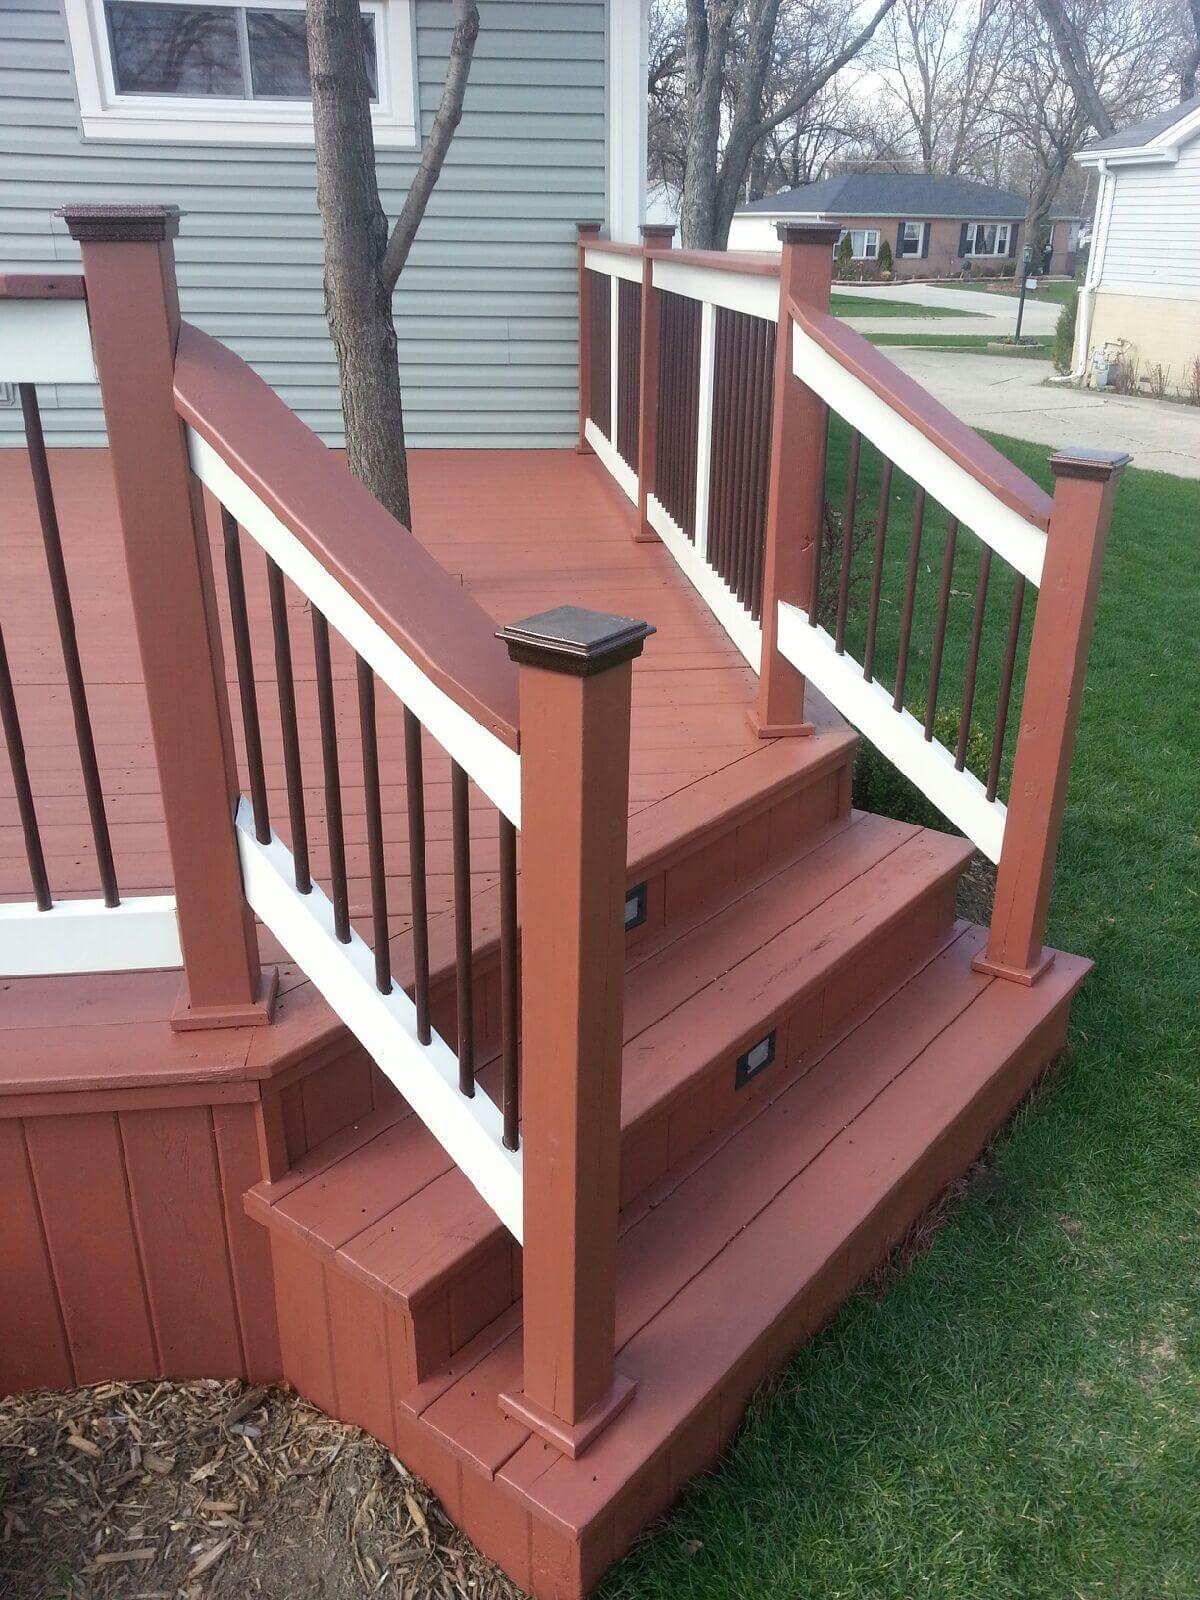 Repairs and maintenance for your deck, fence, and exterior wood staining. - Deck Staining Hoffman Estates - Deck Cleaning Services